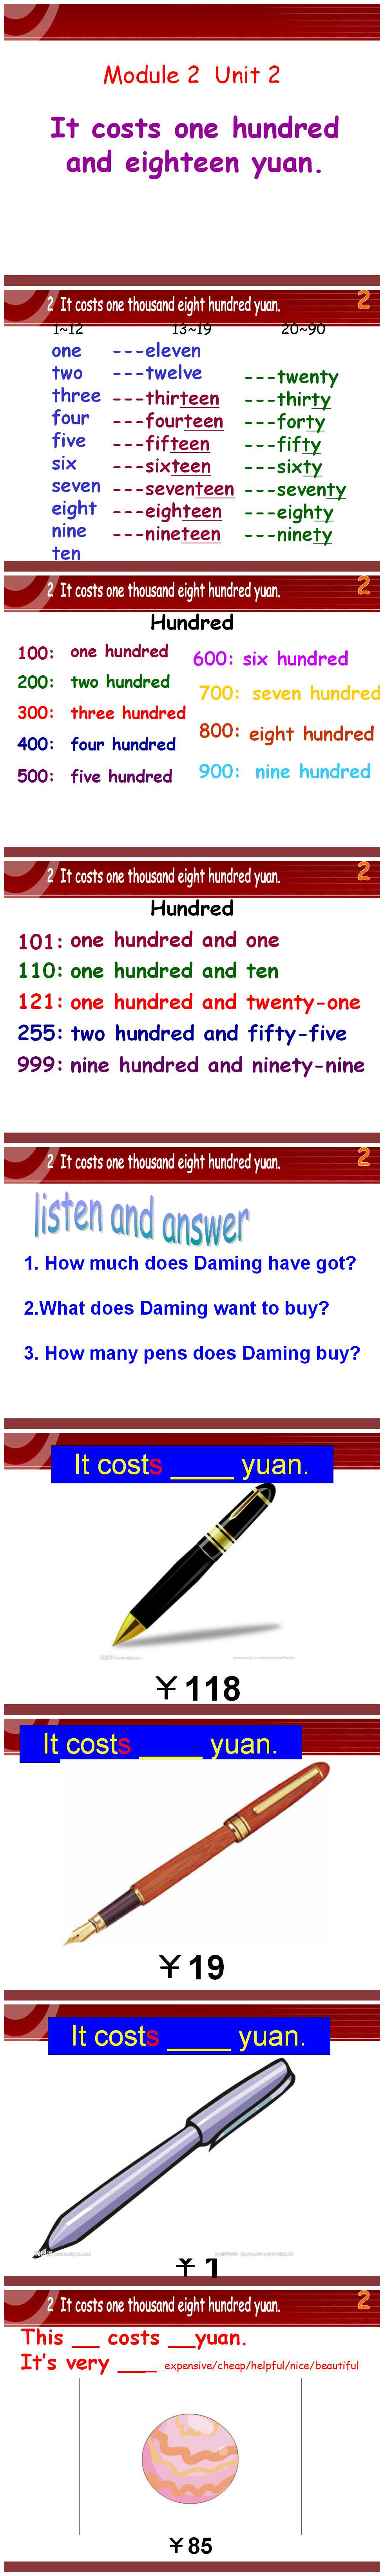 《It costs one thousand eight hundred yuan》PPT课件5